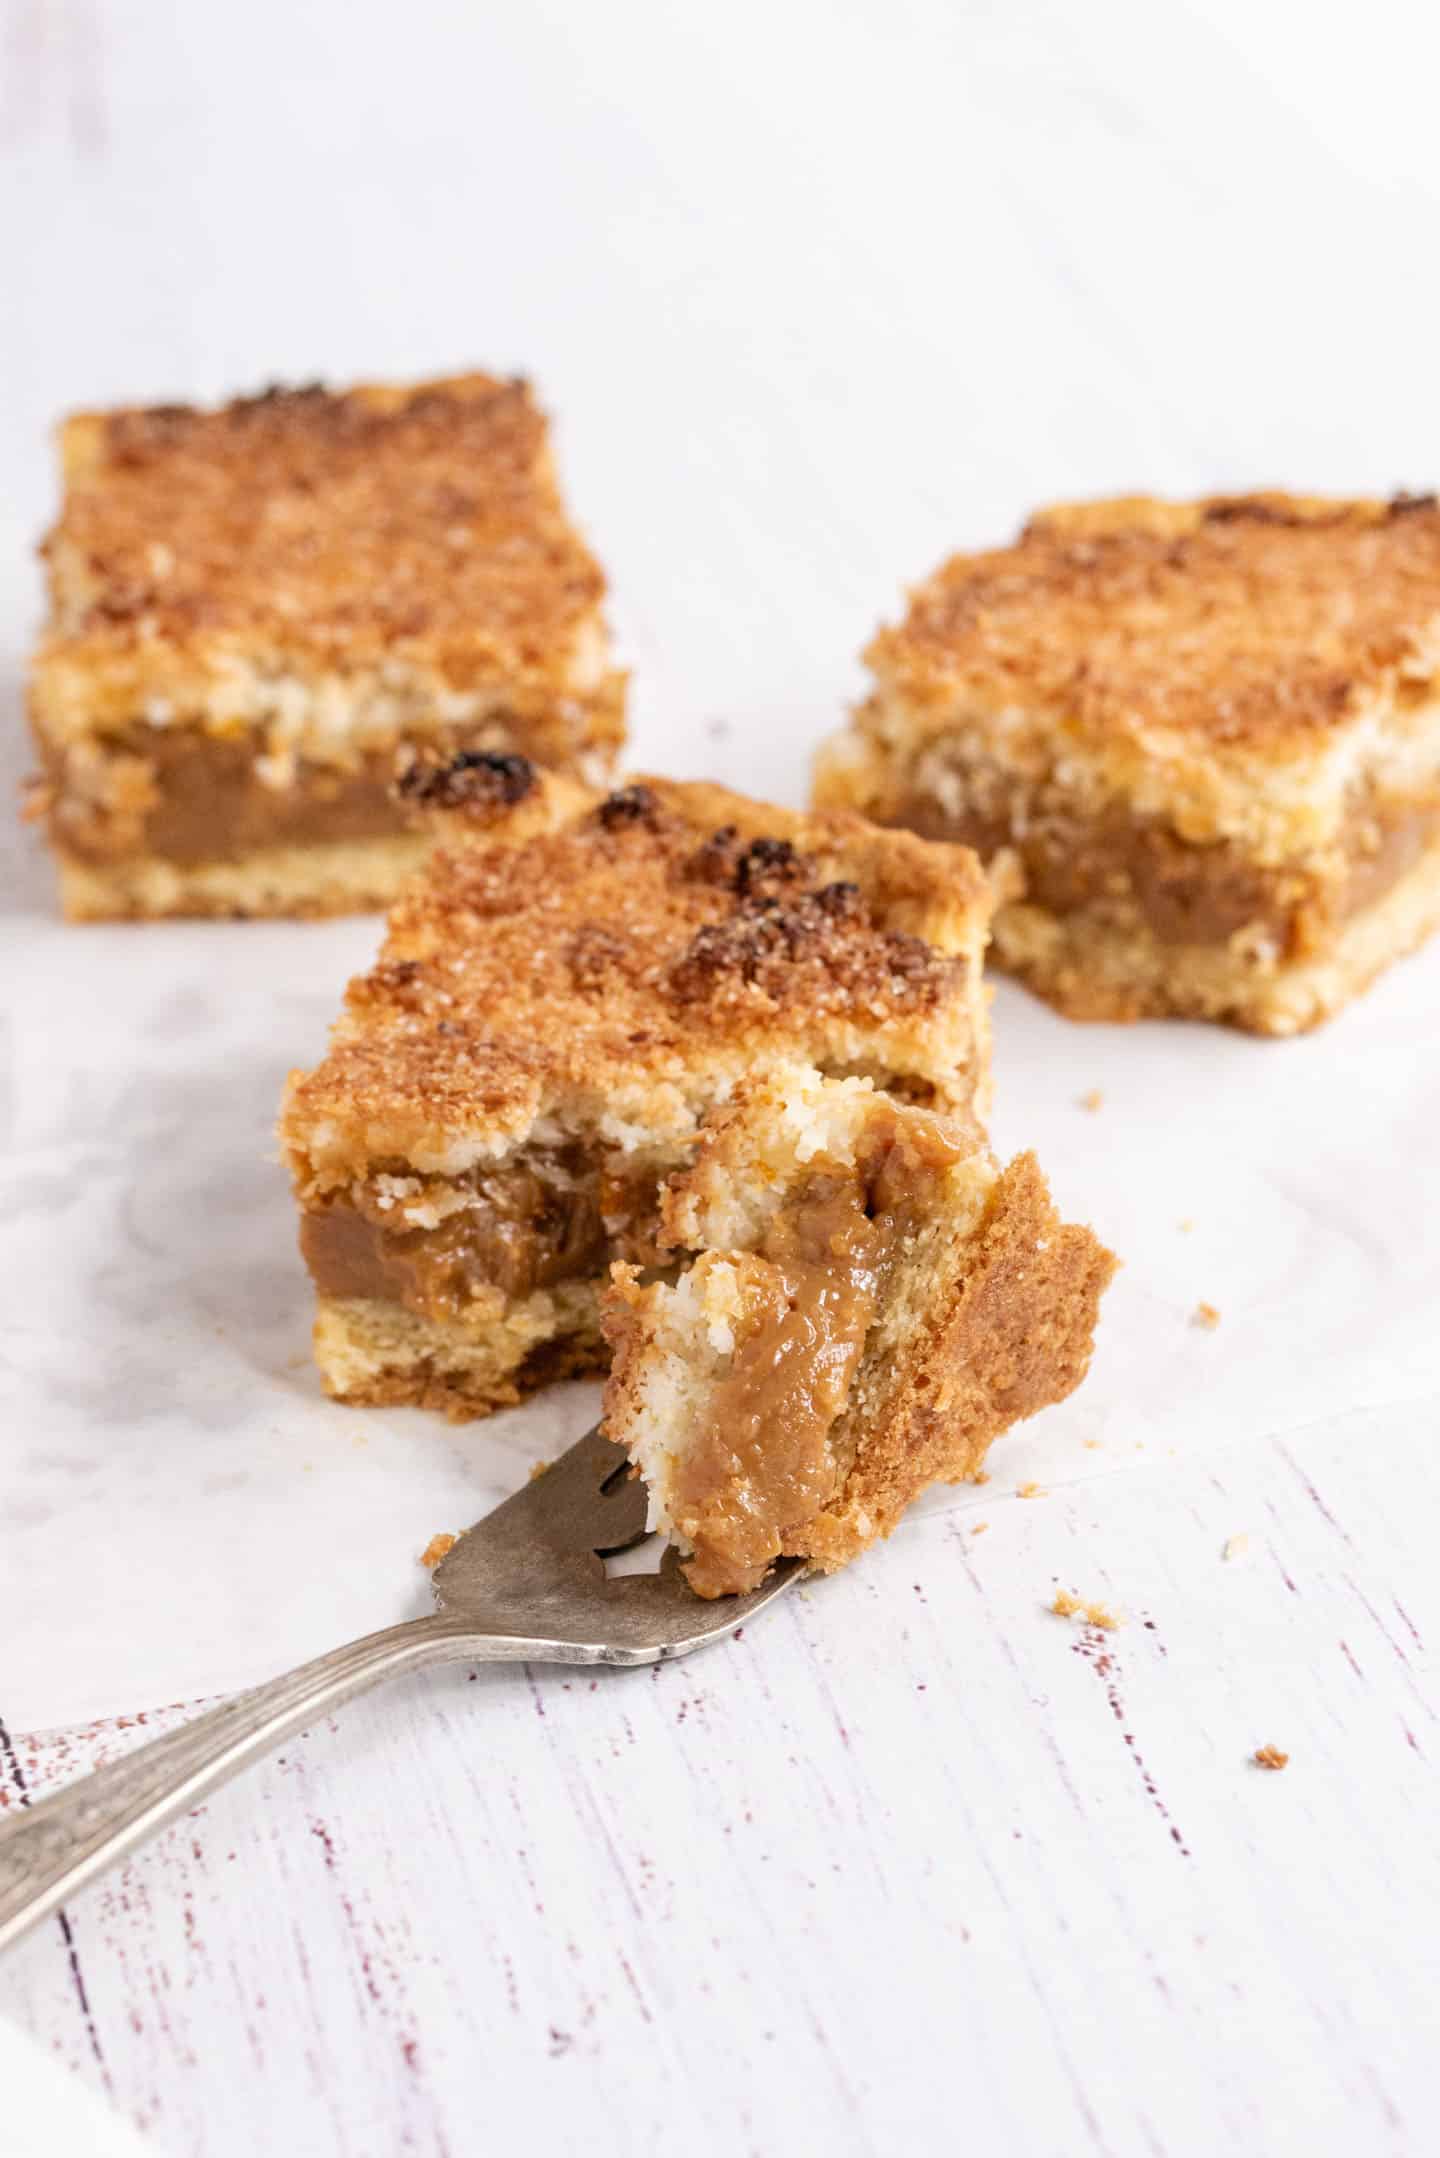 This Coconut and Dulce de Leche Tart is one of my favorites and an absolute Argentine classic. Very moist, sweet and with a citric touch, it’s the perfect option for any occasion.  